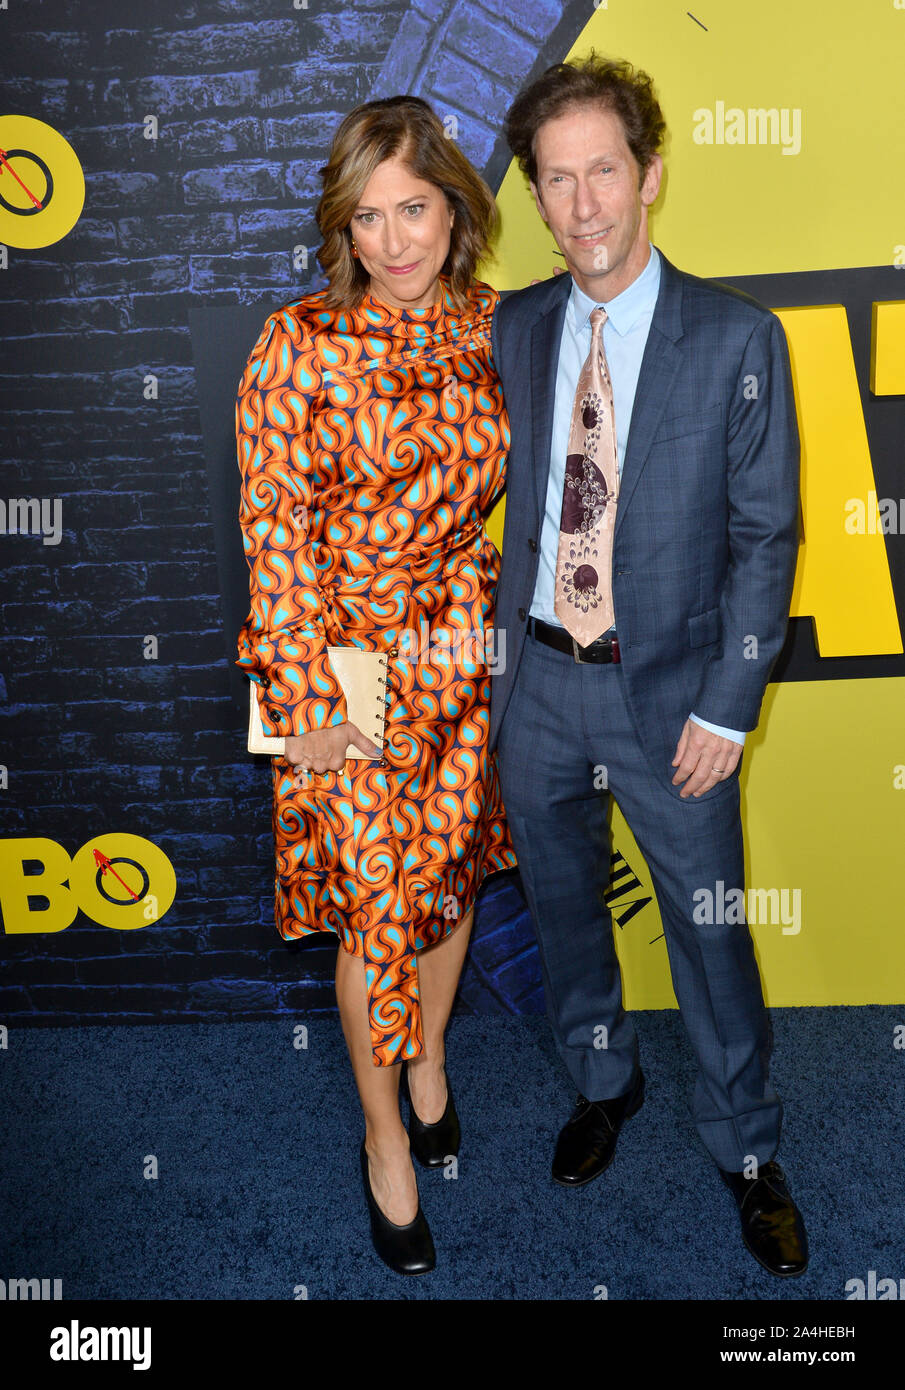 Los Angeles, USA. 14th Oct, 2019. Tim Blake Nelson & Lisa Benavides-Nelson at the premiere of HBO's 'Watchmen' at the Cinerama Dome, Hollywood. Picture: Paul Smith/Featureflash Credit: Paul Smith/Alamy Live News Stock Photo